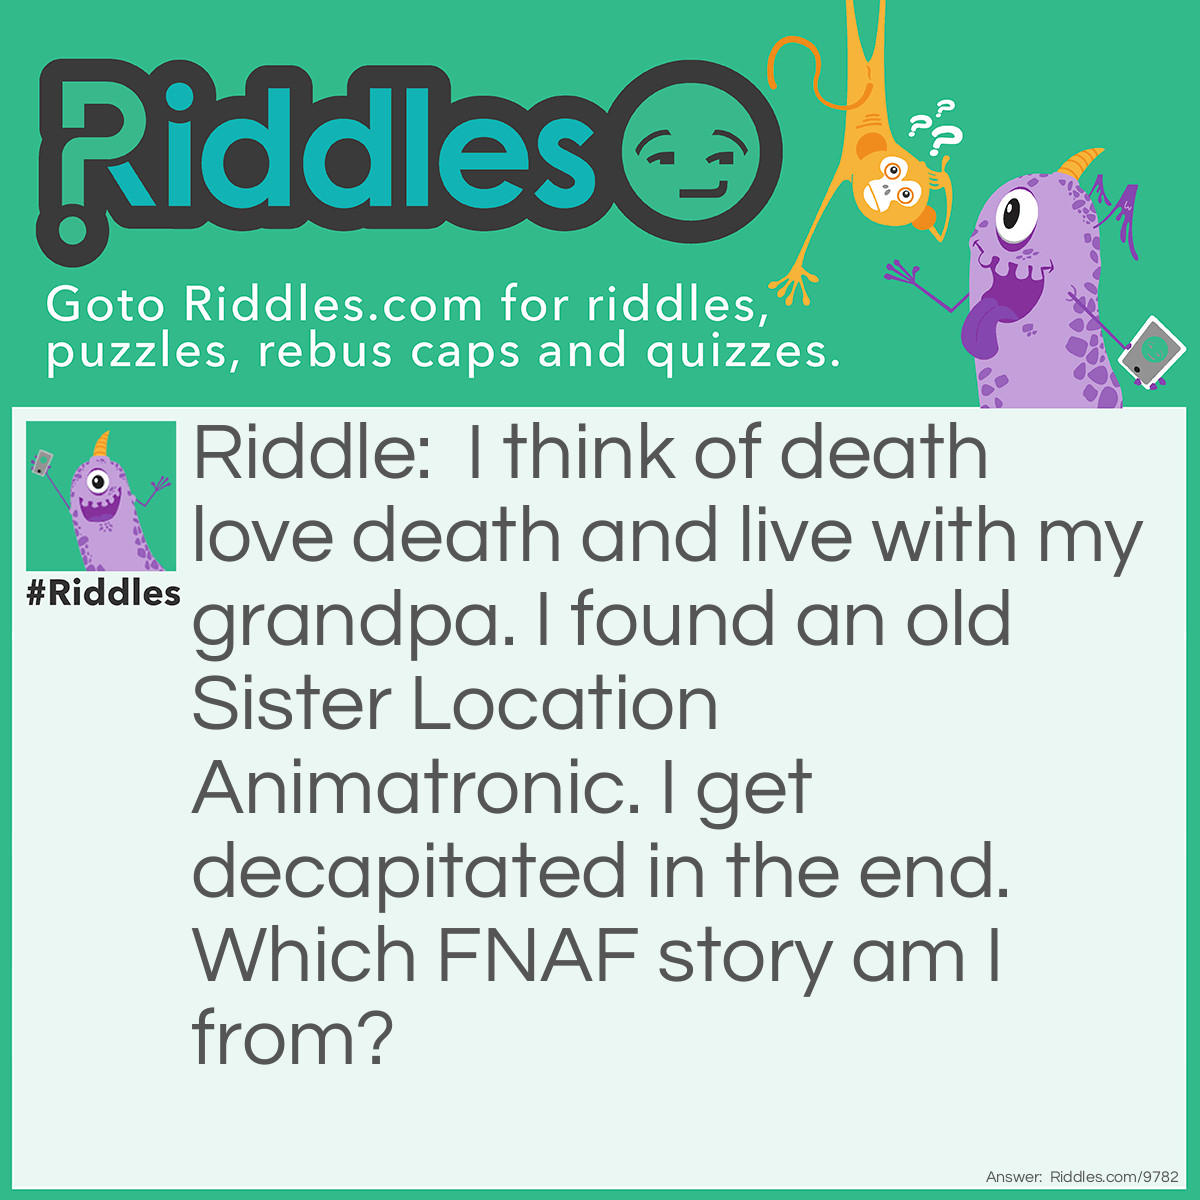 Riddle: I think of death love death and live with my grandpa. I found an old Sister Location Animatronic. I get decapitated in the end. Which FNAF story am I from? Answer: FNAF fazbears frights book one story three count the ways.